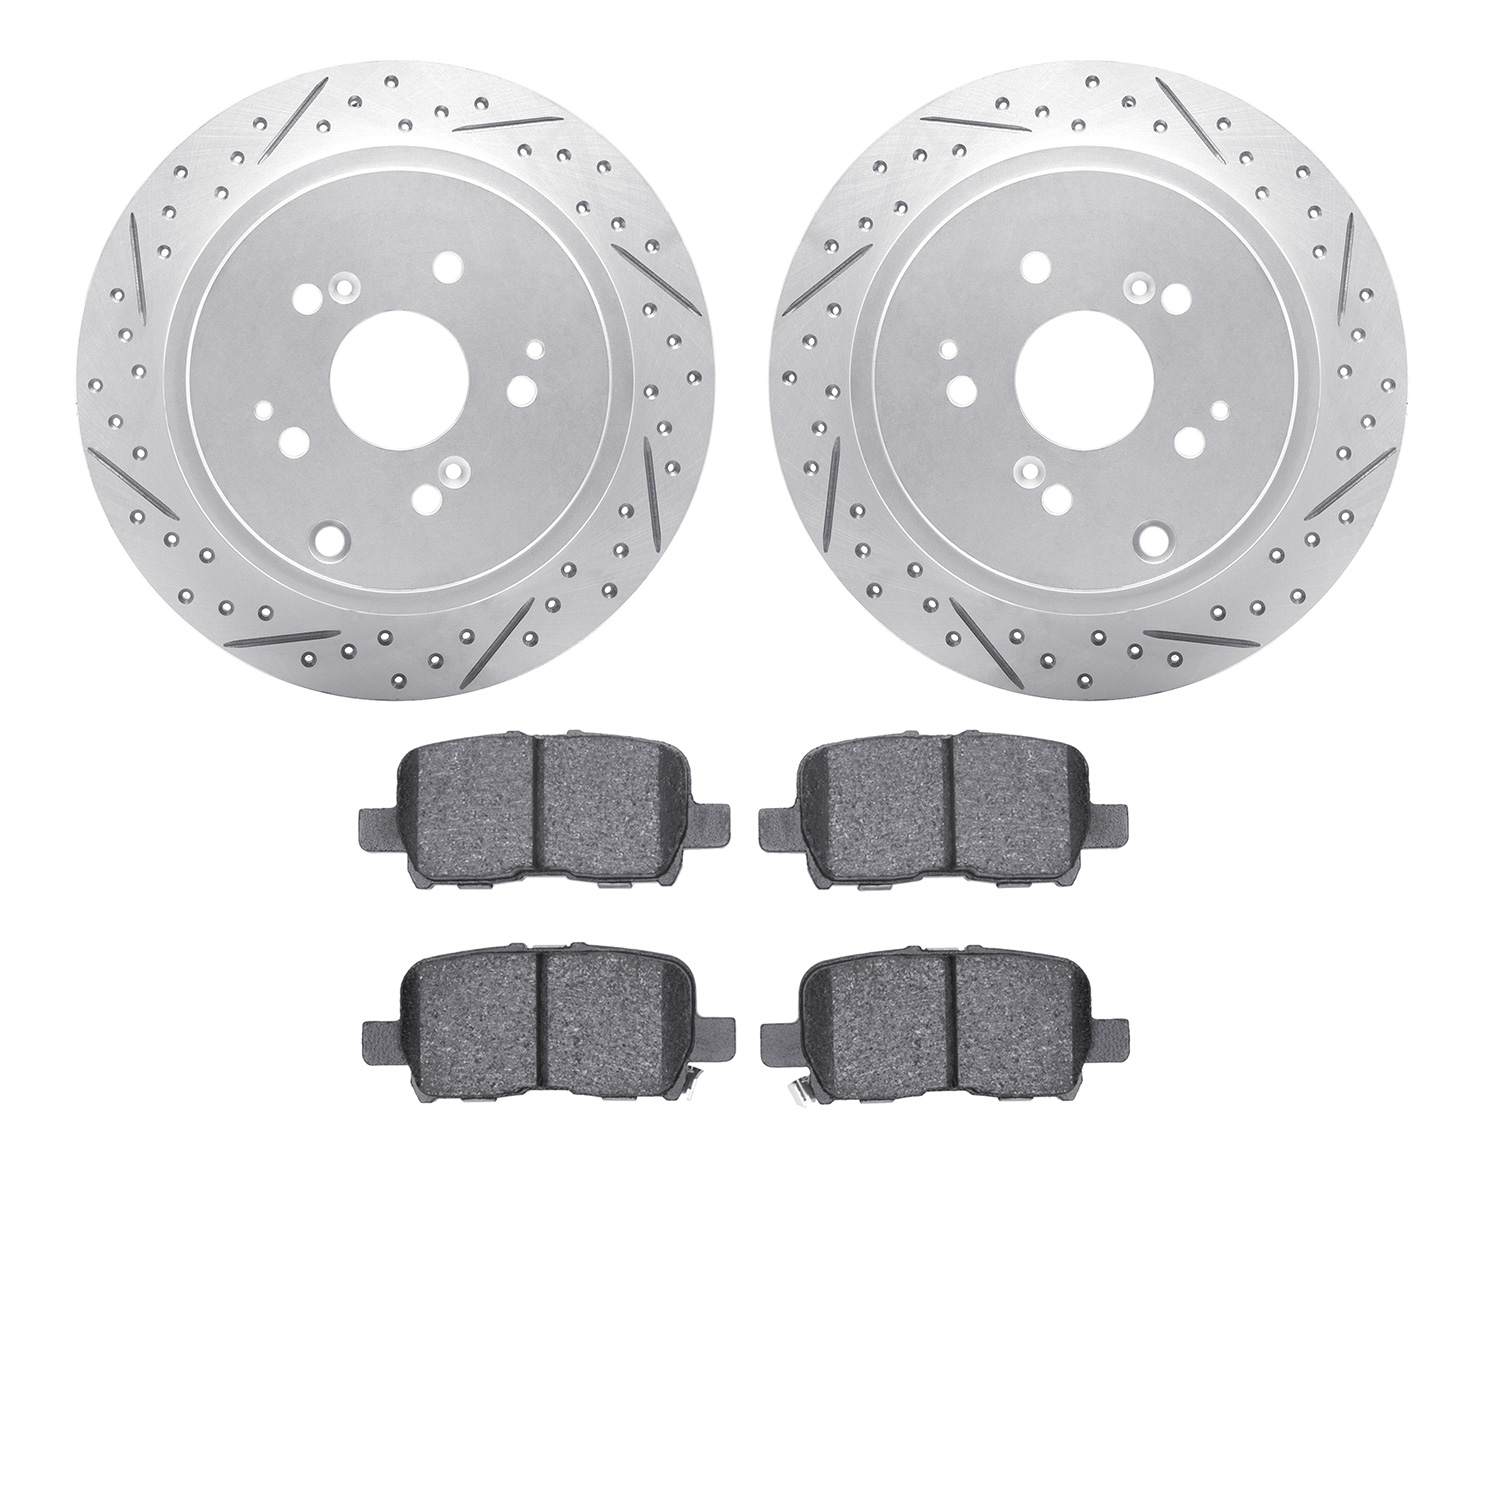 2502-59062 Geoperformance Drilled/Slotted Rotors w/5000 Advanced Brake Pads Kit, 2001-2008 Acura/Honda, Position: Rear